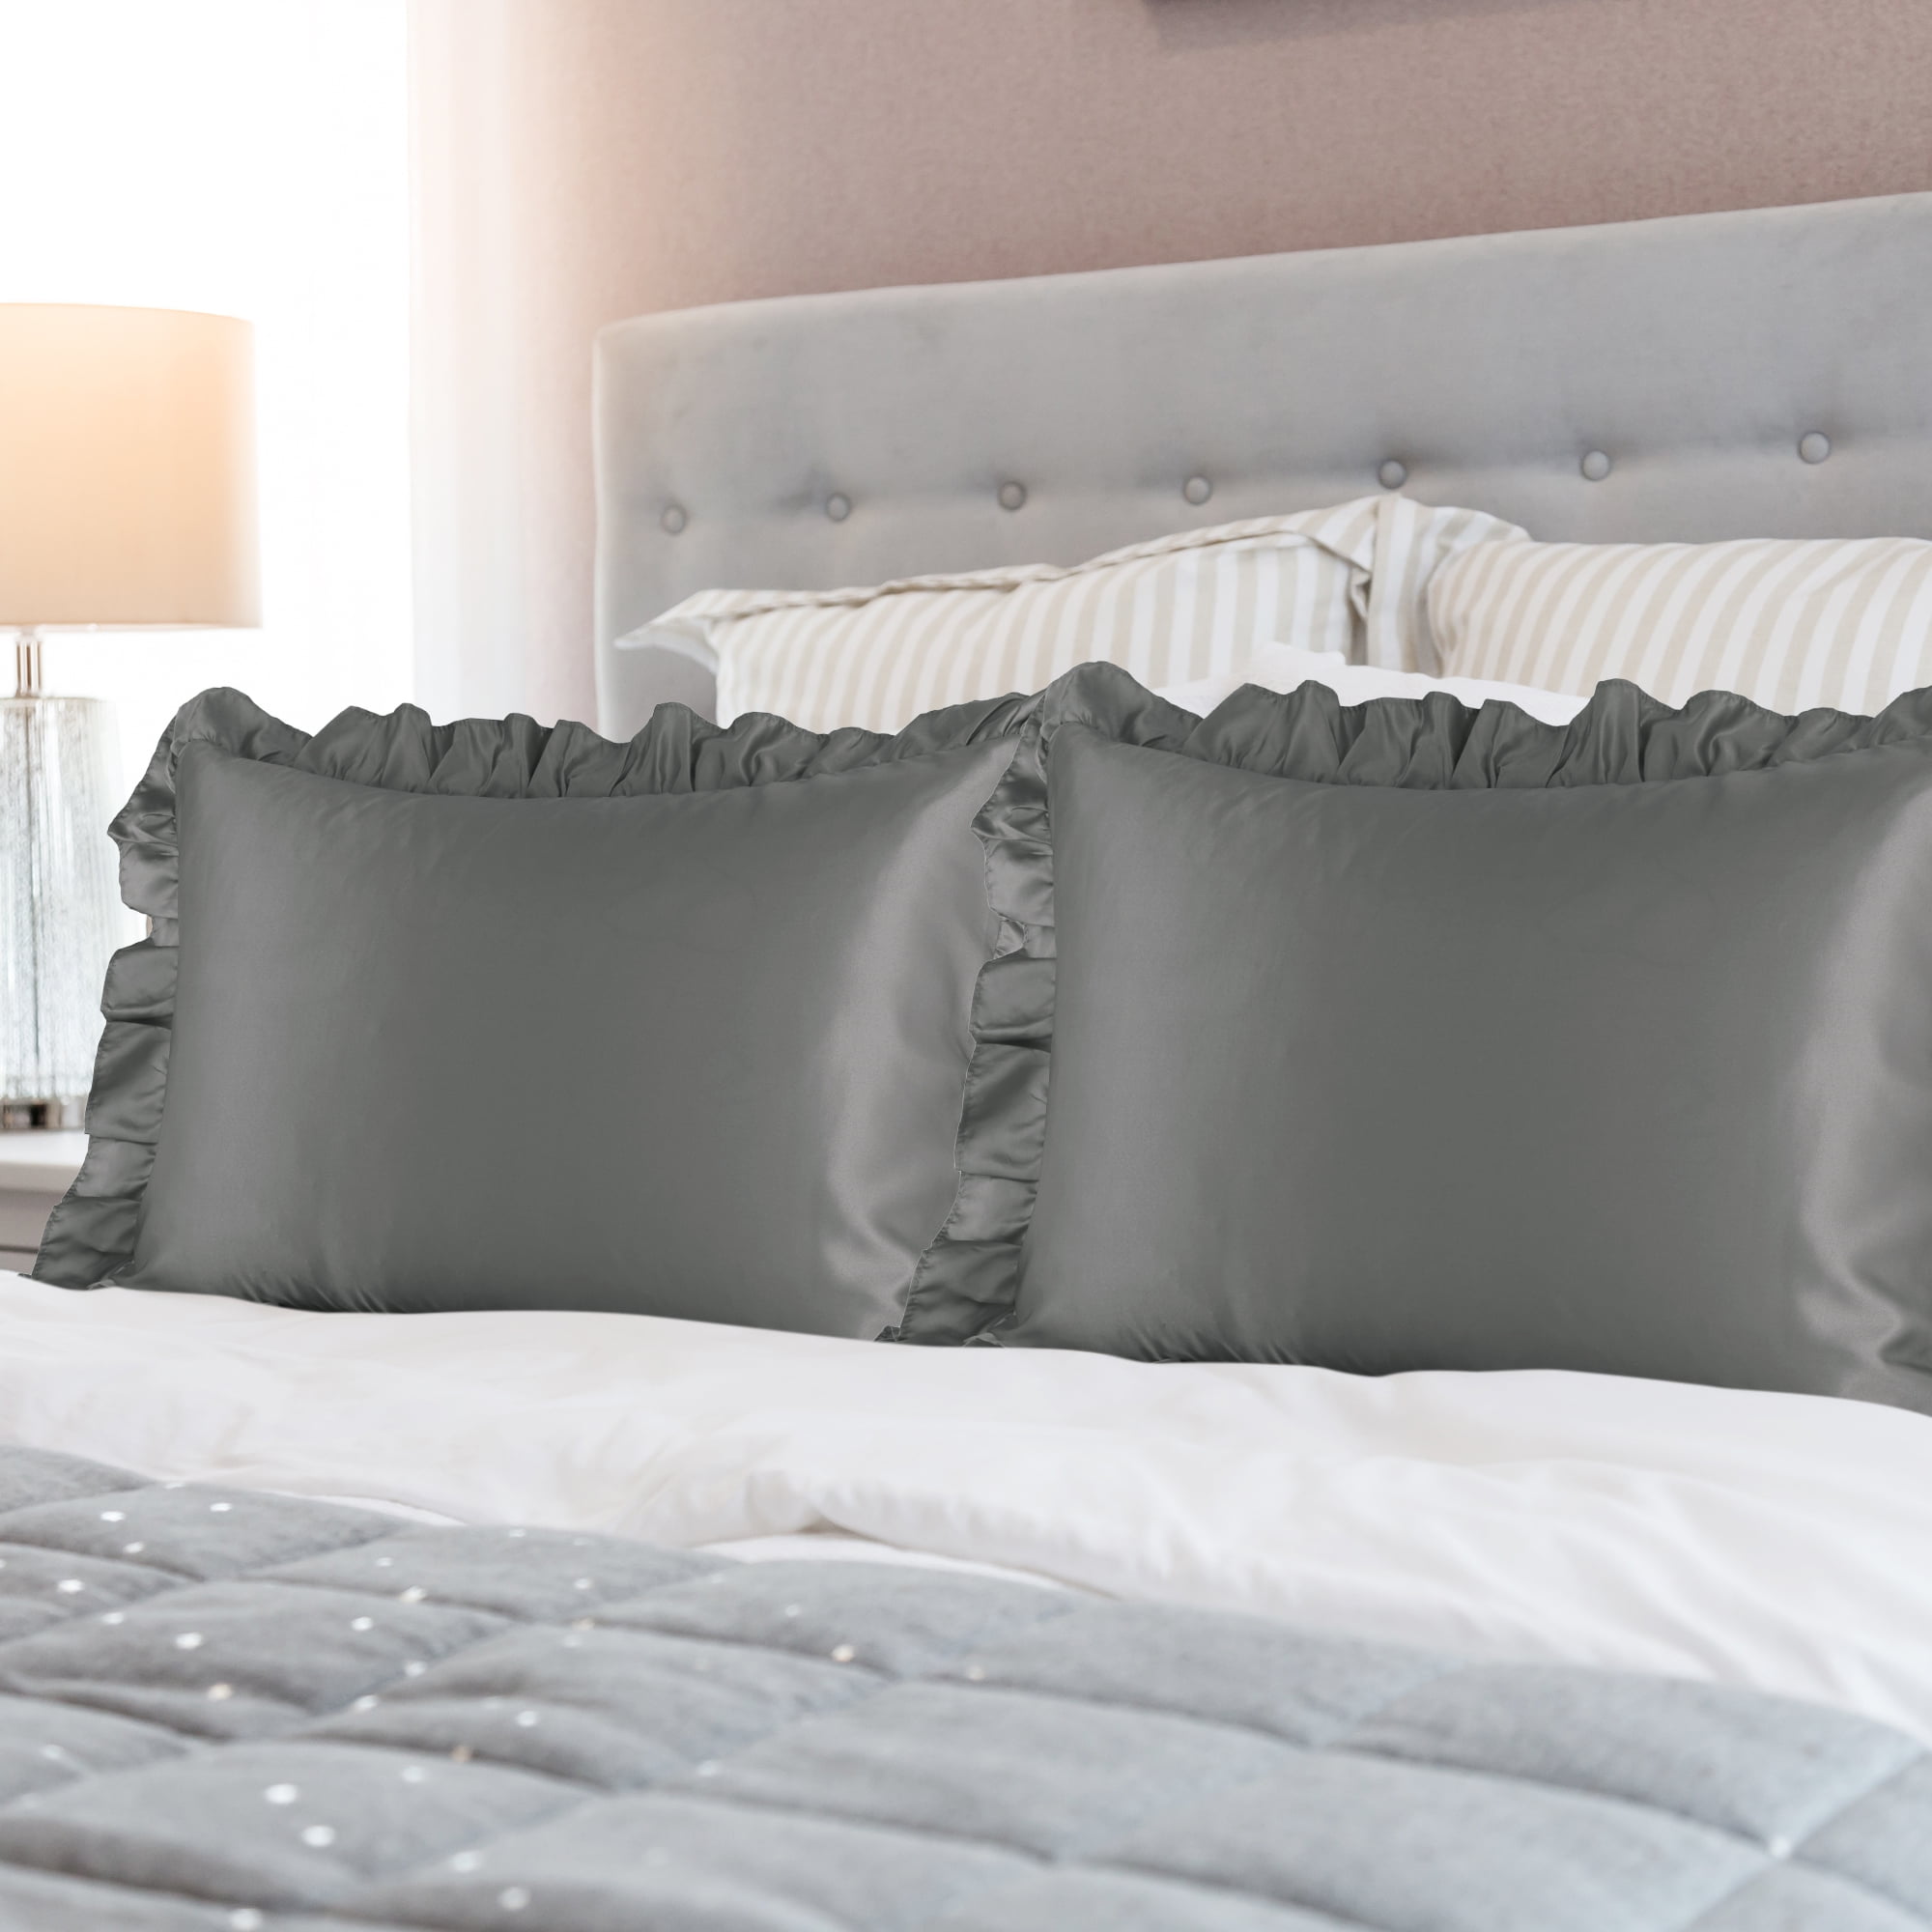 Details about   Wonderskirt European Pillow Sham in Light Grey Sophisticated Soft and Silky 